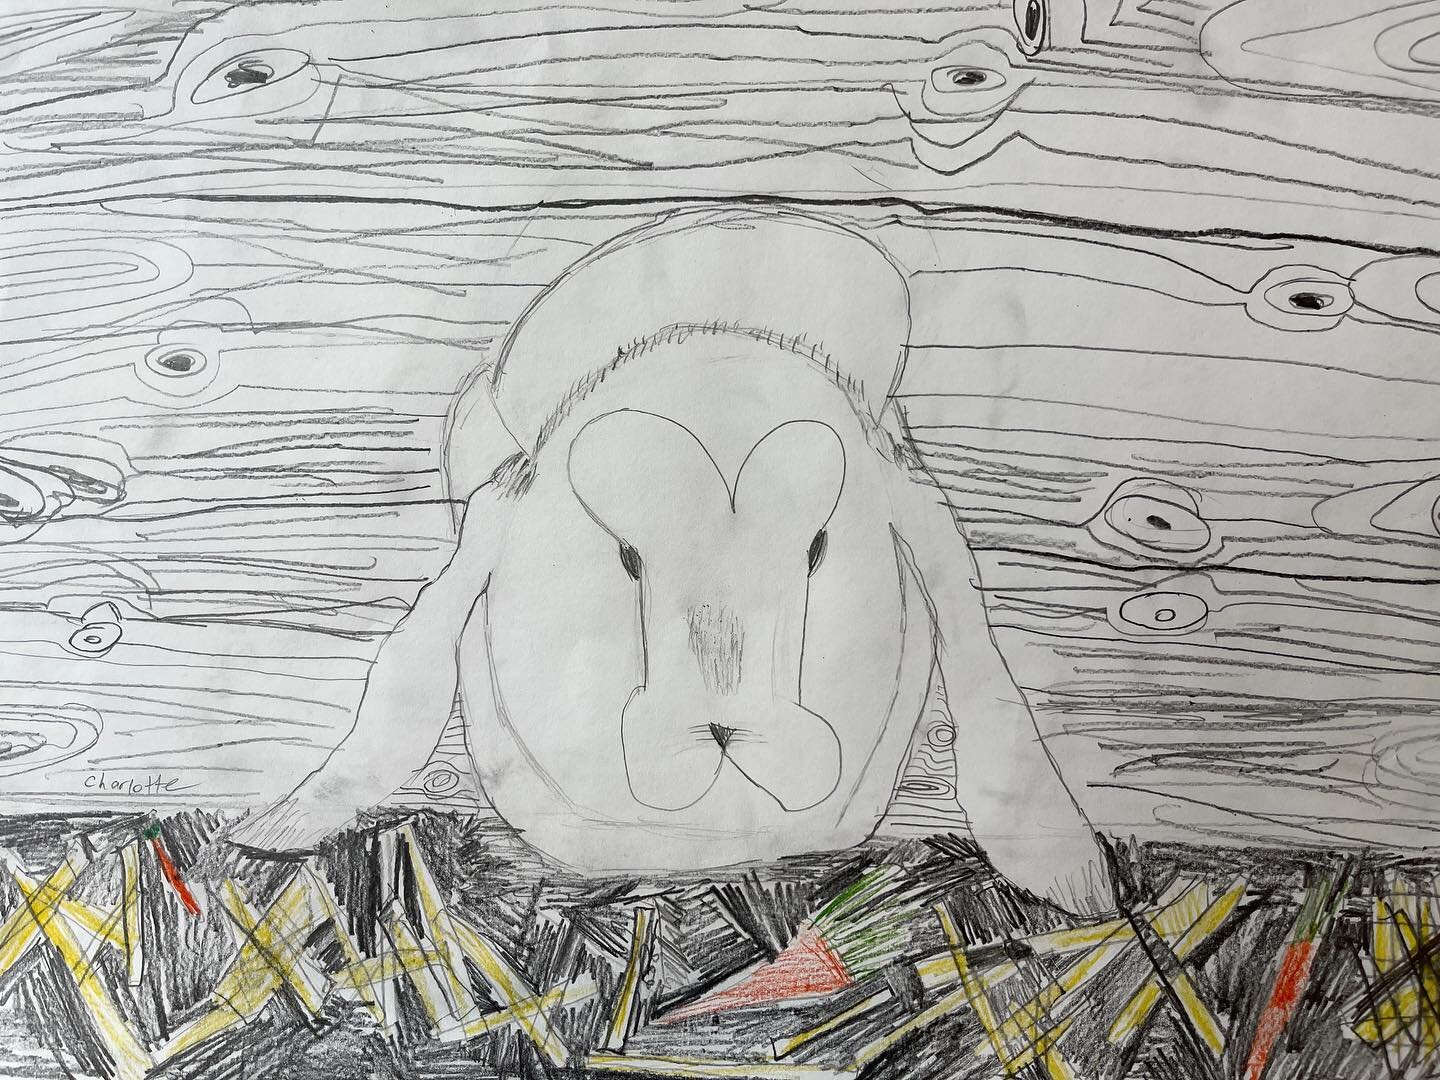 Spring bunnies. Pencil and colored pencil. Great line work. 
.
.
.
.
.
#elementaryarteducation #artteacher #artforkids #artprojectforkids #arteducation #pencil